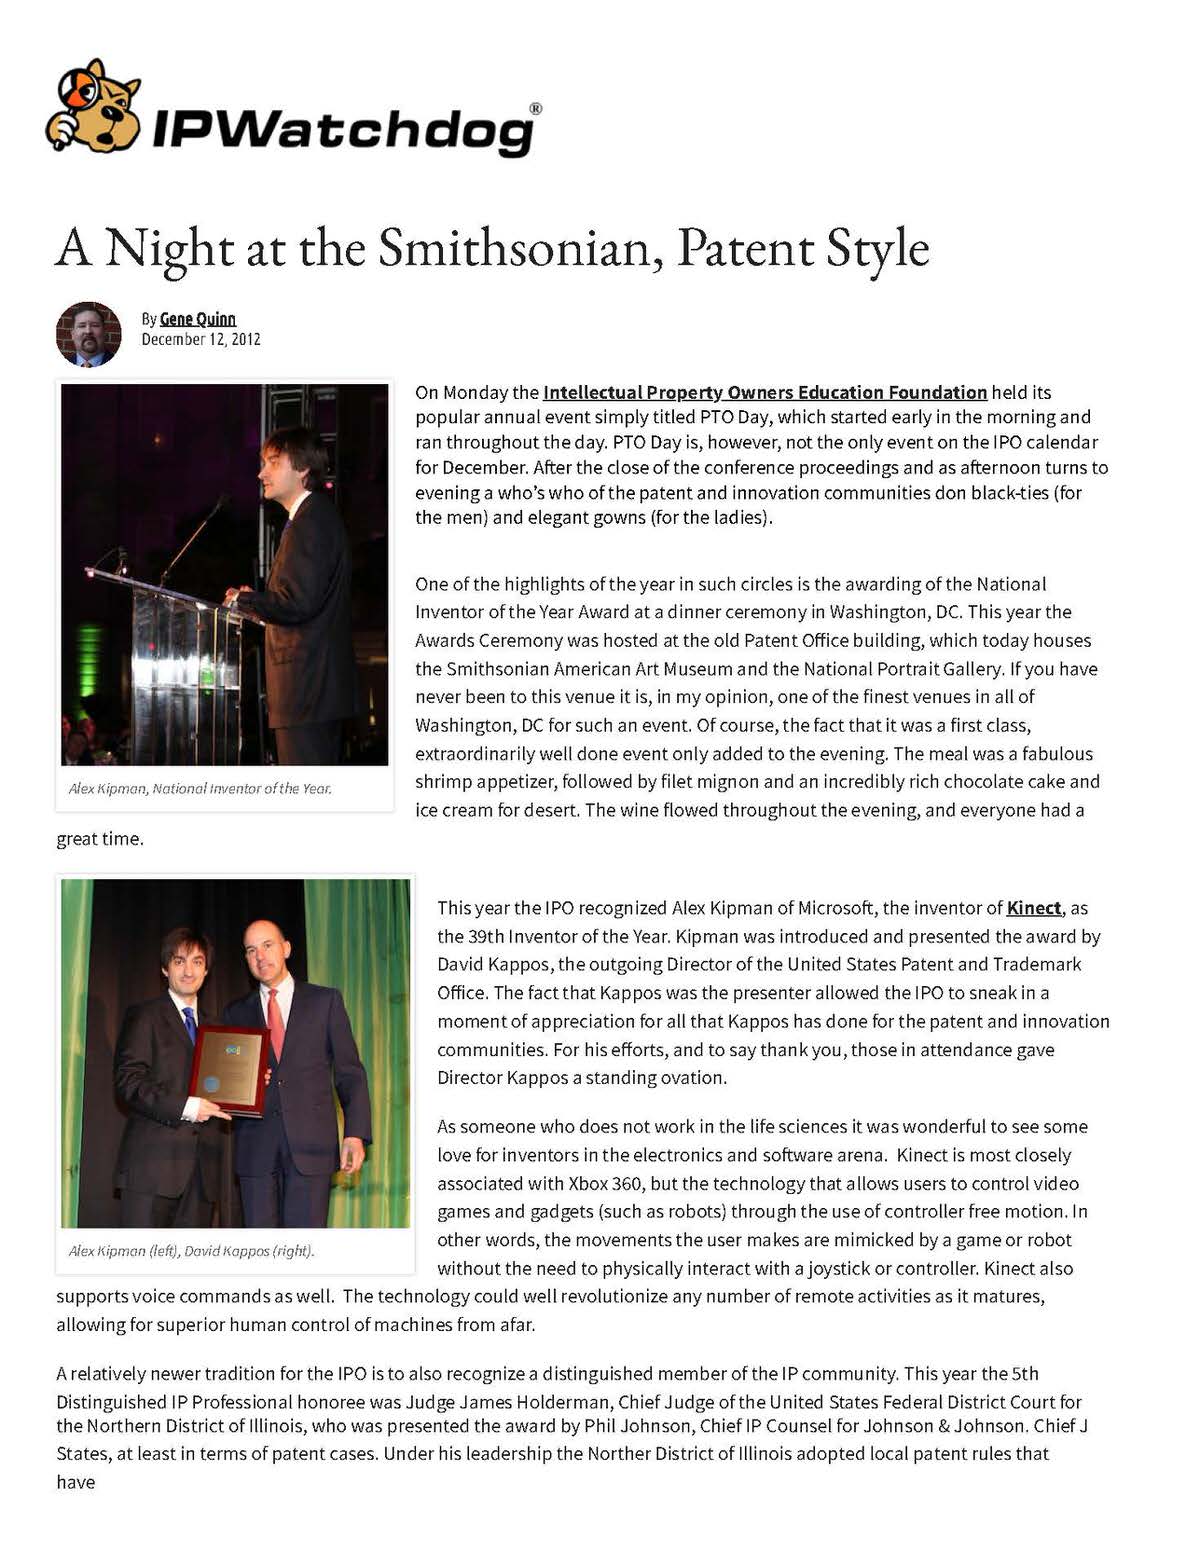 A 2012 feature in IPWatchdog on the Intellectual Property Owners Education Foundation's event "A Night at the Smithsonian, Patent Style," where it named its 39th Inventor of the Year and awarded other honors. Dr. Gary K. Michelson was added to the National Inventors Hall of Fame and later served on the IPOE Board of Directors.